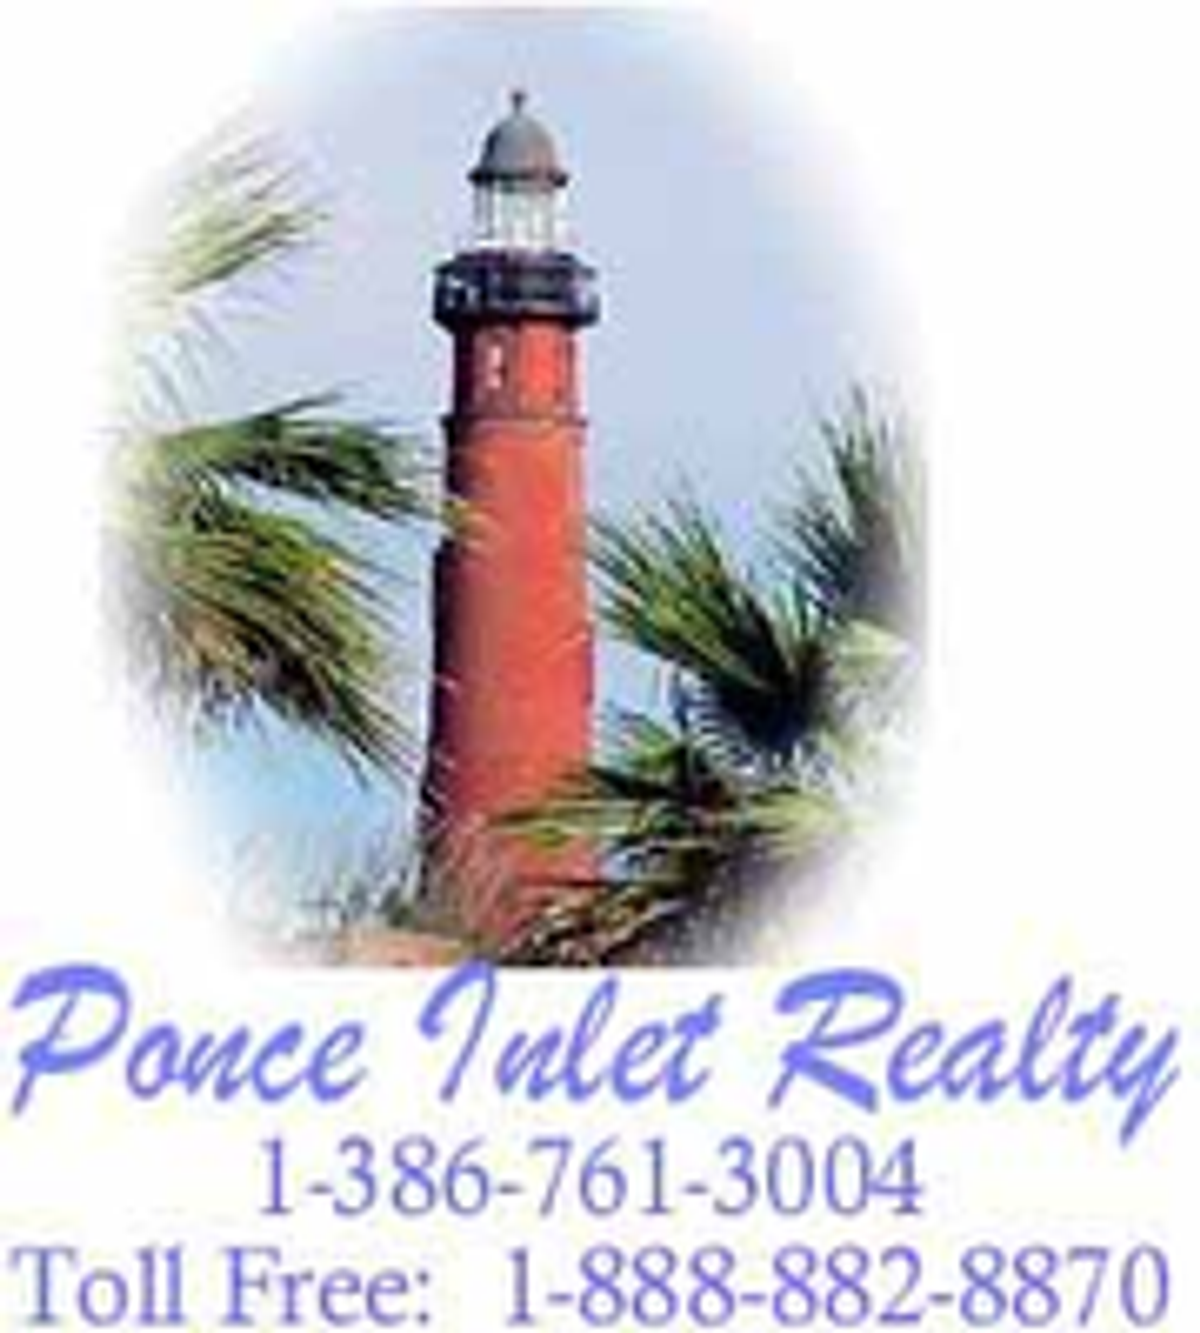 Photo for Linda Deen, Listing Agent at Ponce Inlet Realty, Inc